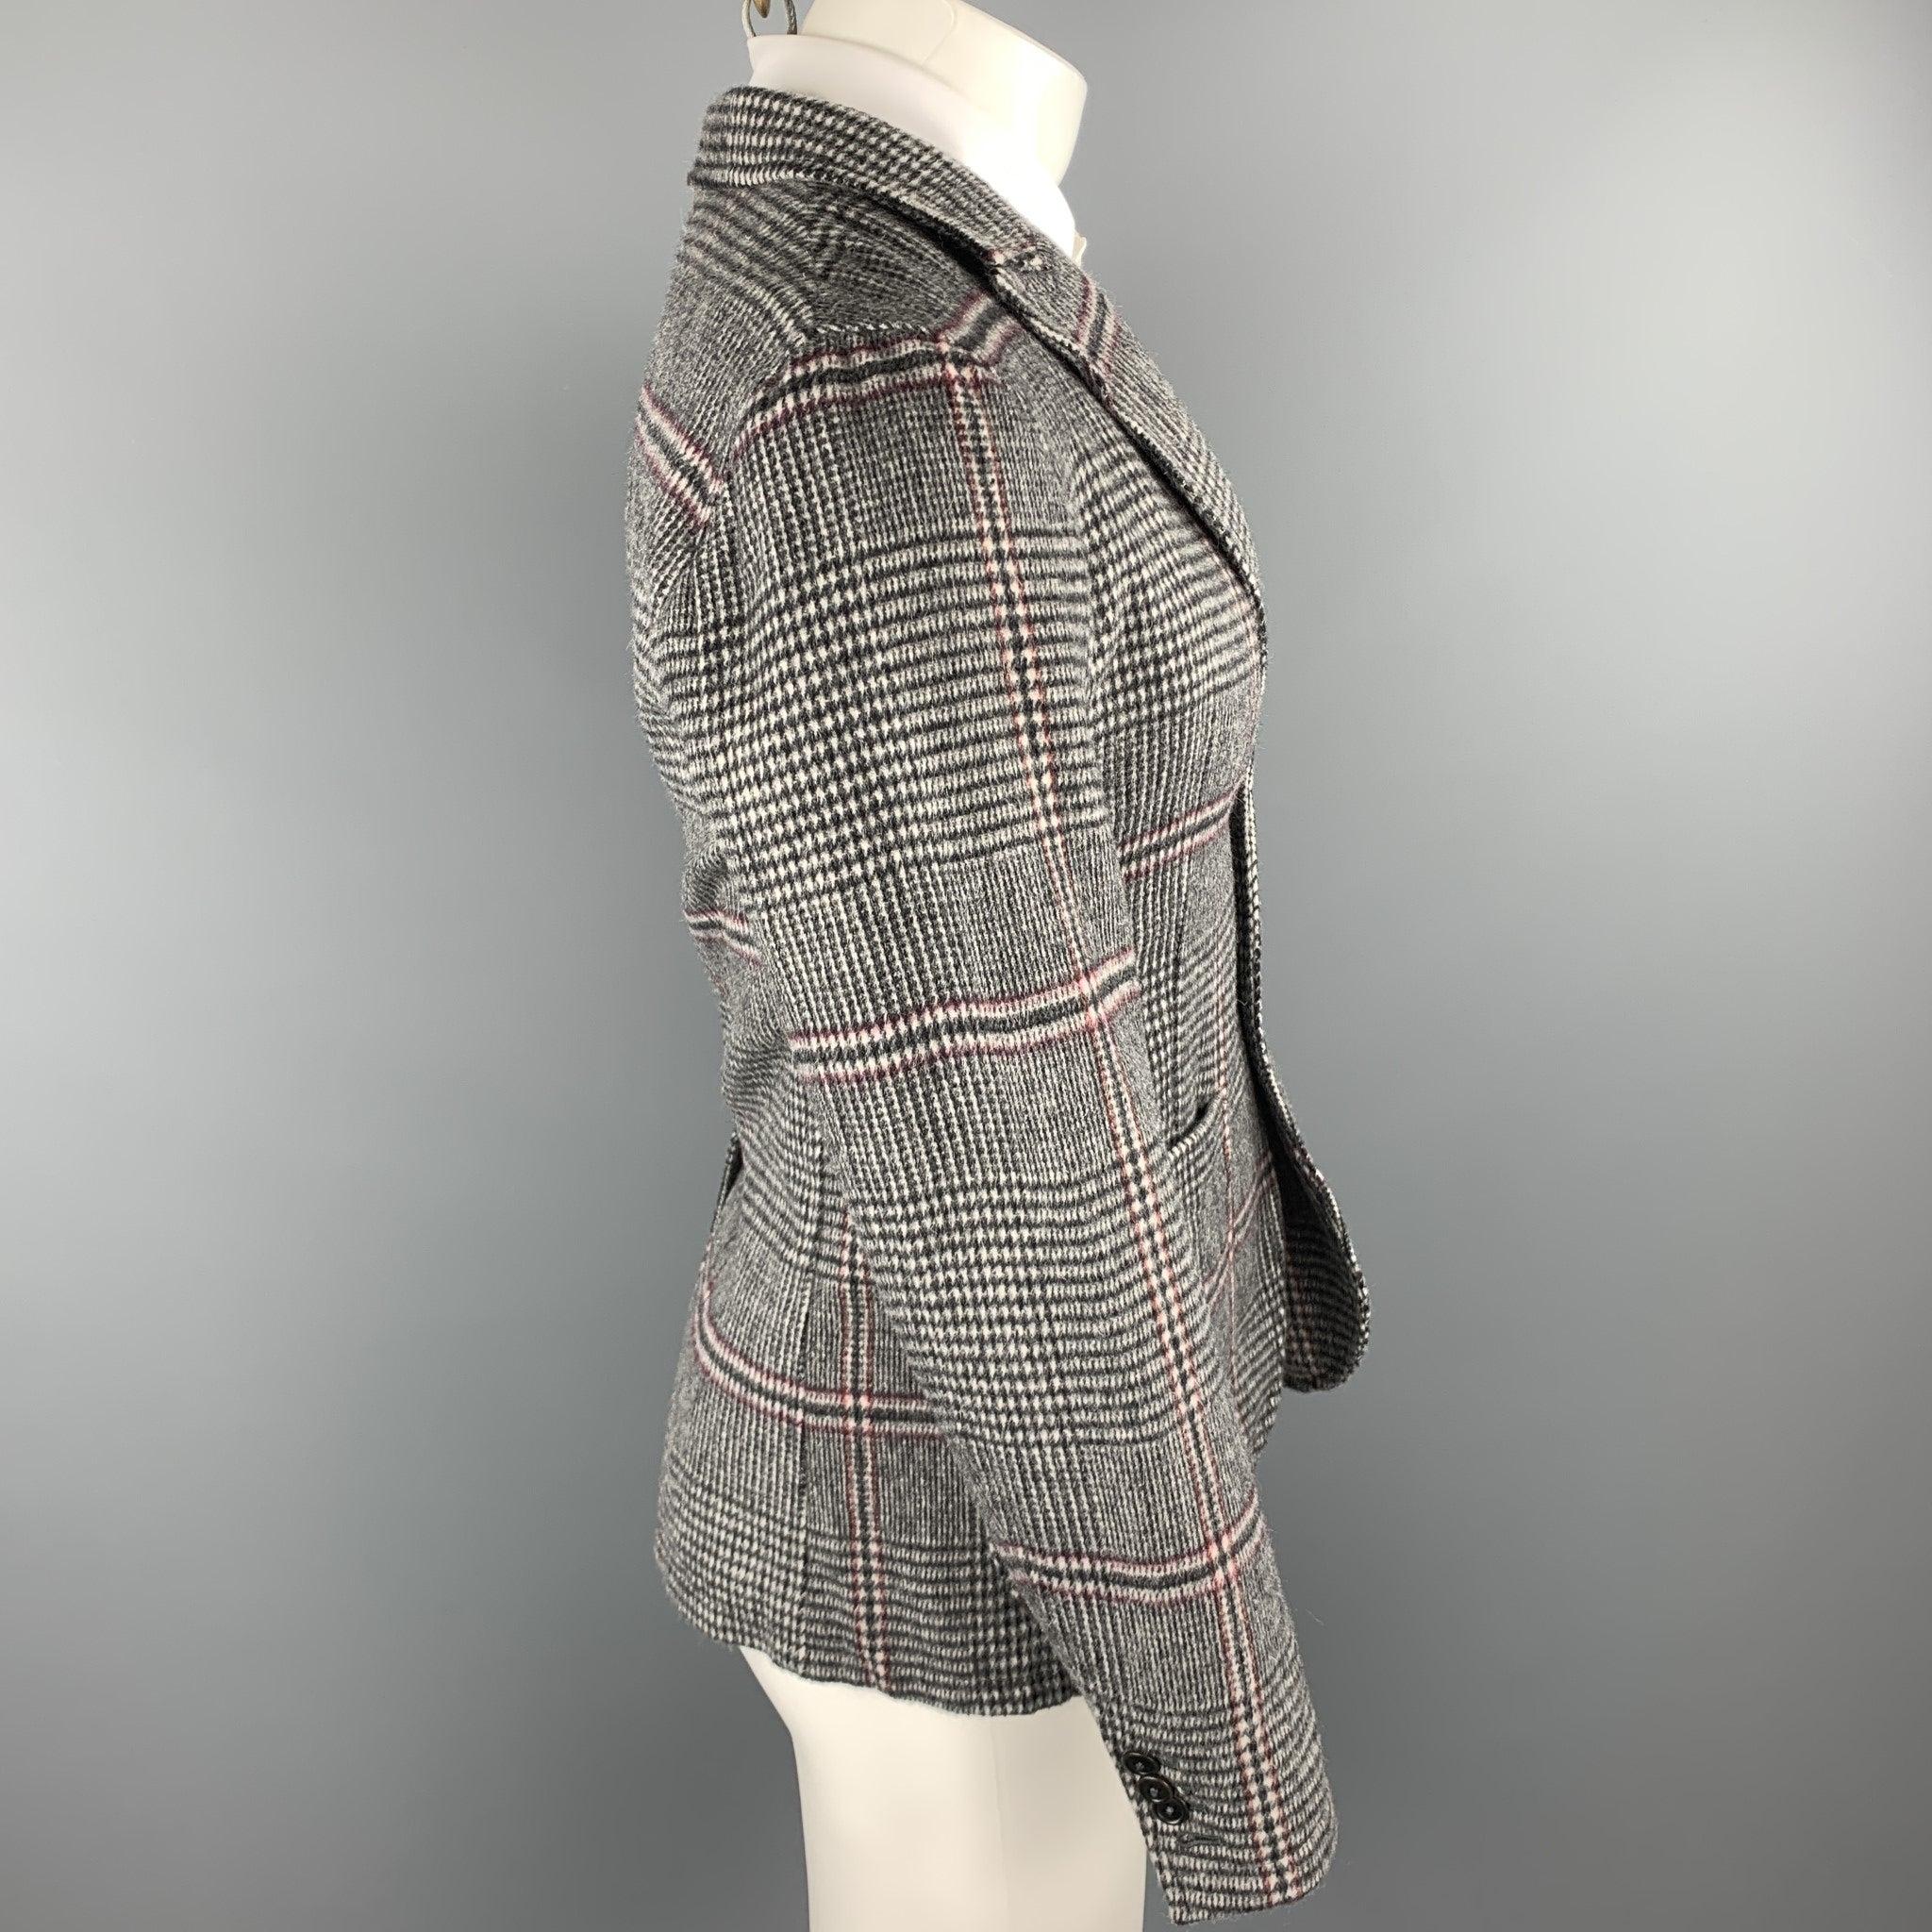 TS (S) Size S Gray Plaid Wool Blend Peak Lapel Sport Coat In Good Condition For Sale In San Francisco, CA